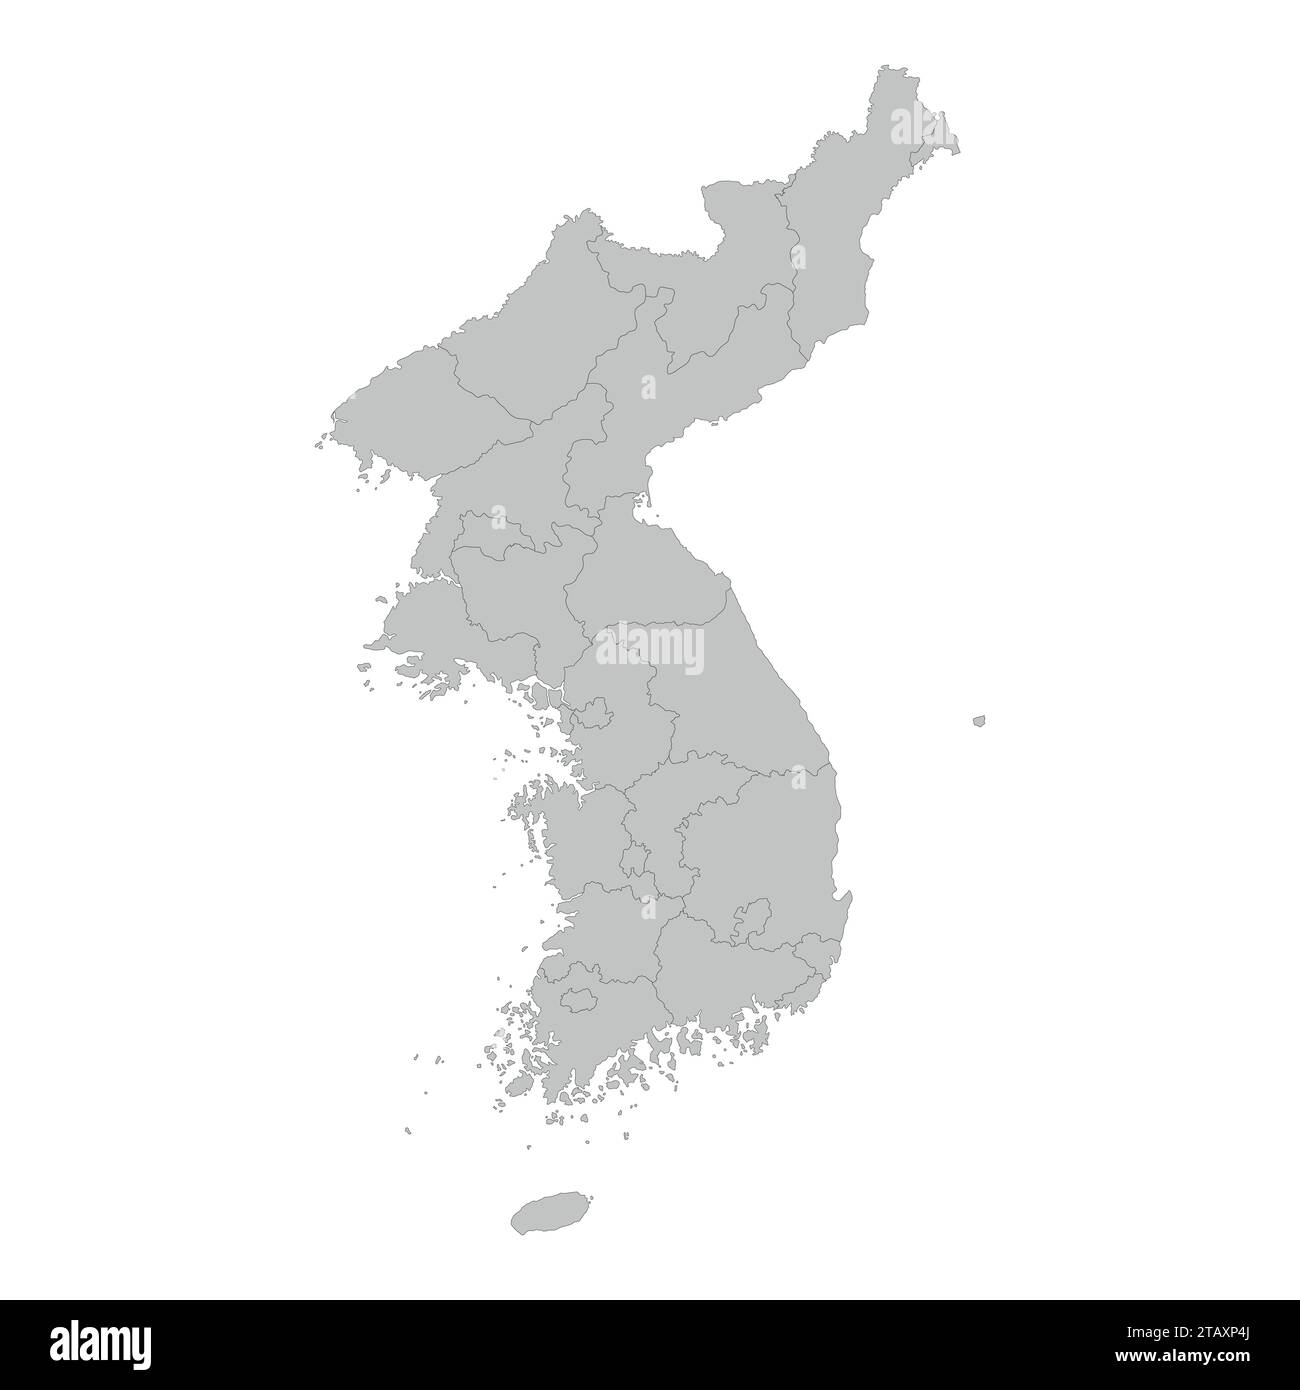 North and South Korea map with province bordres on white background, Stock Vector